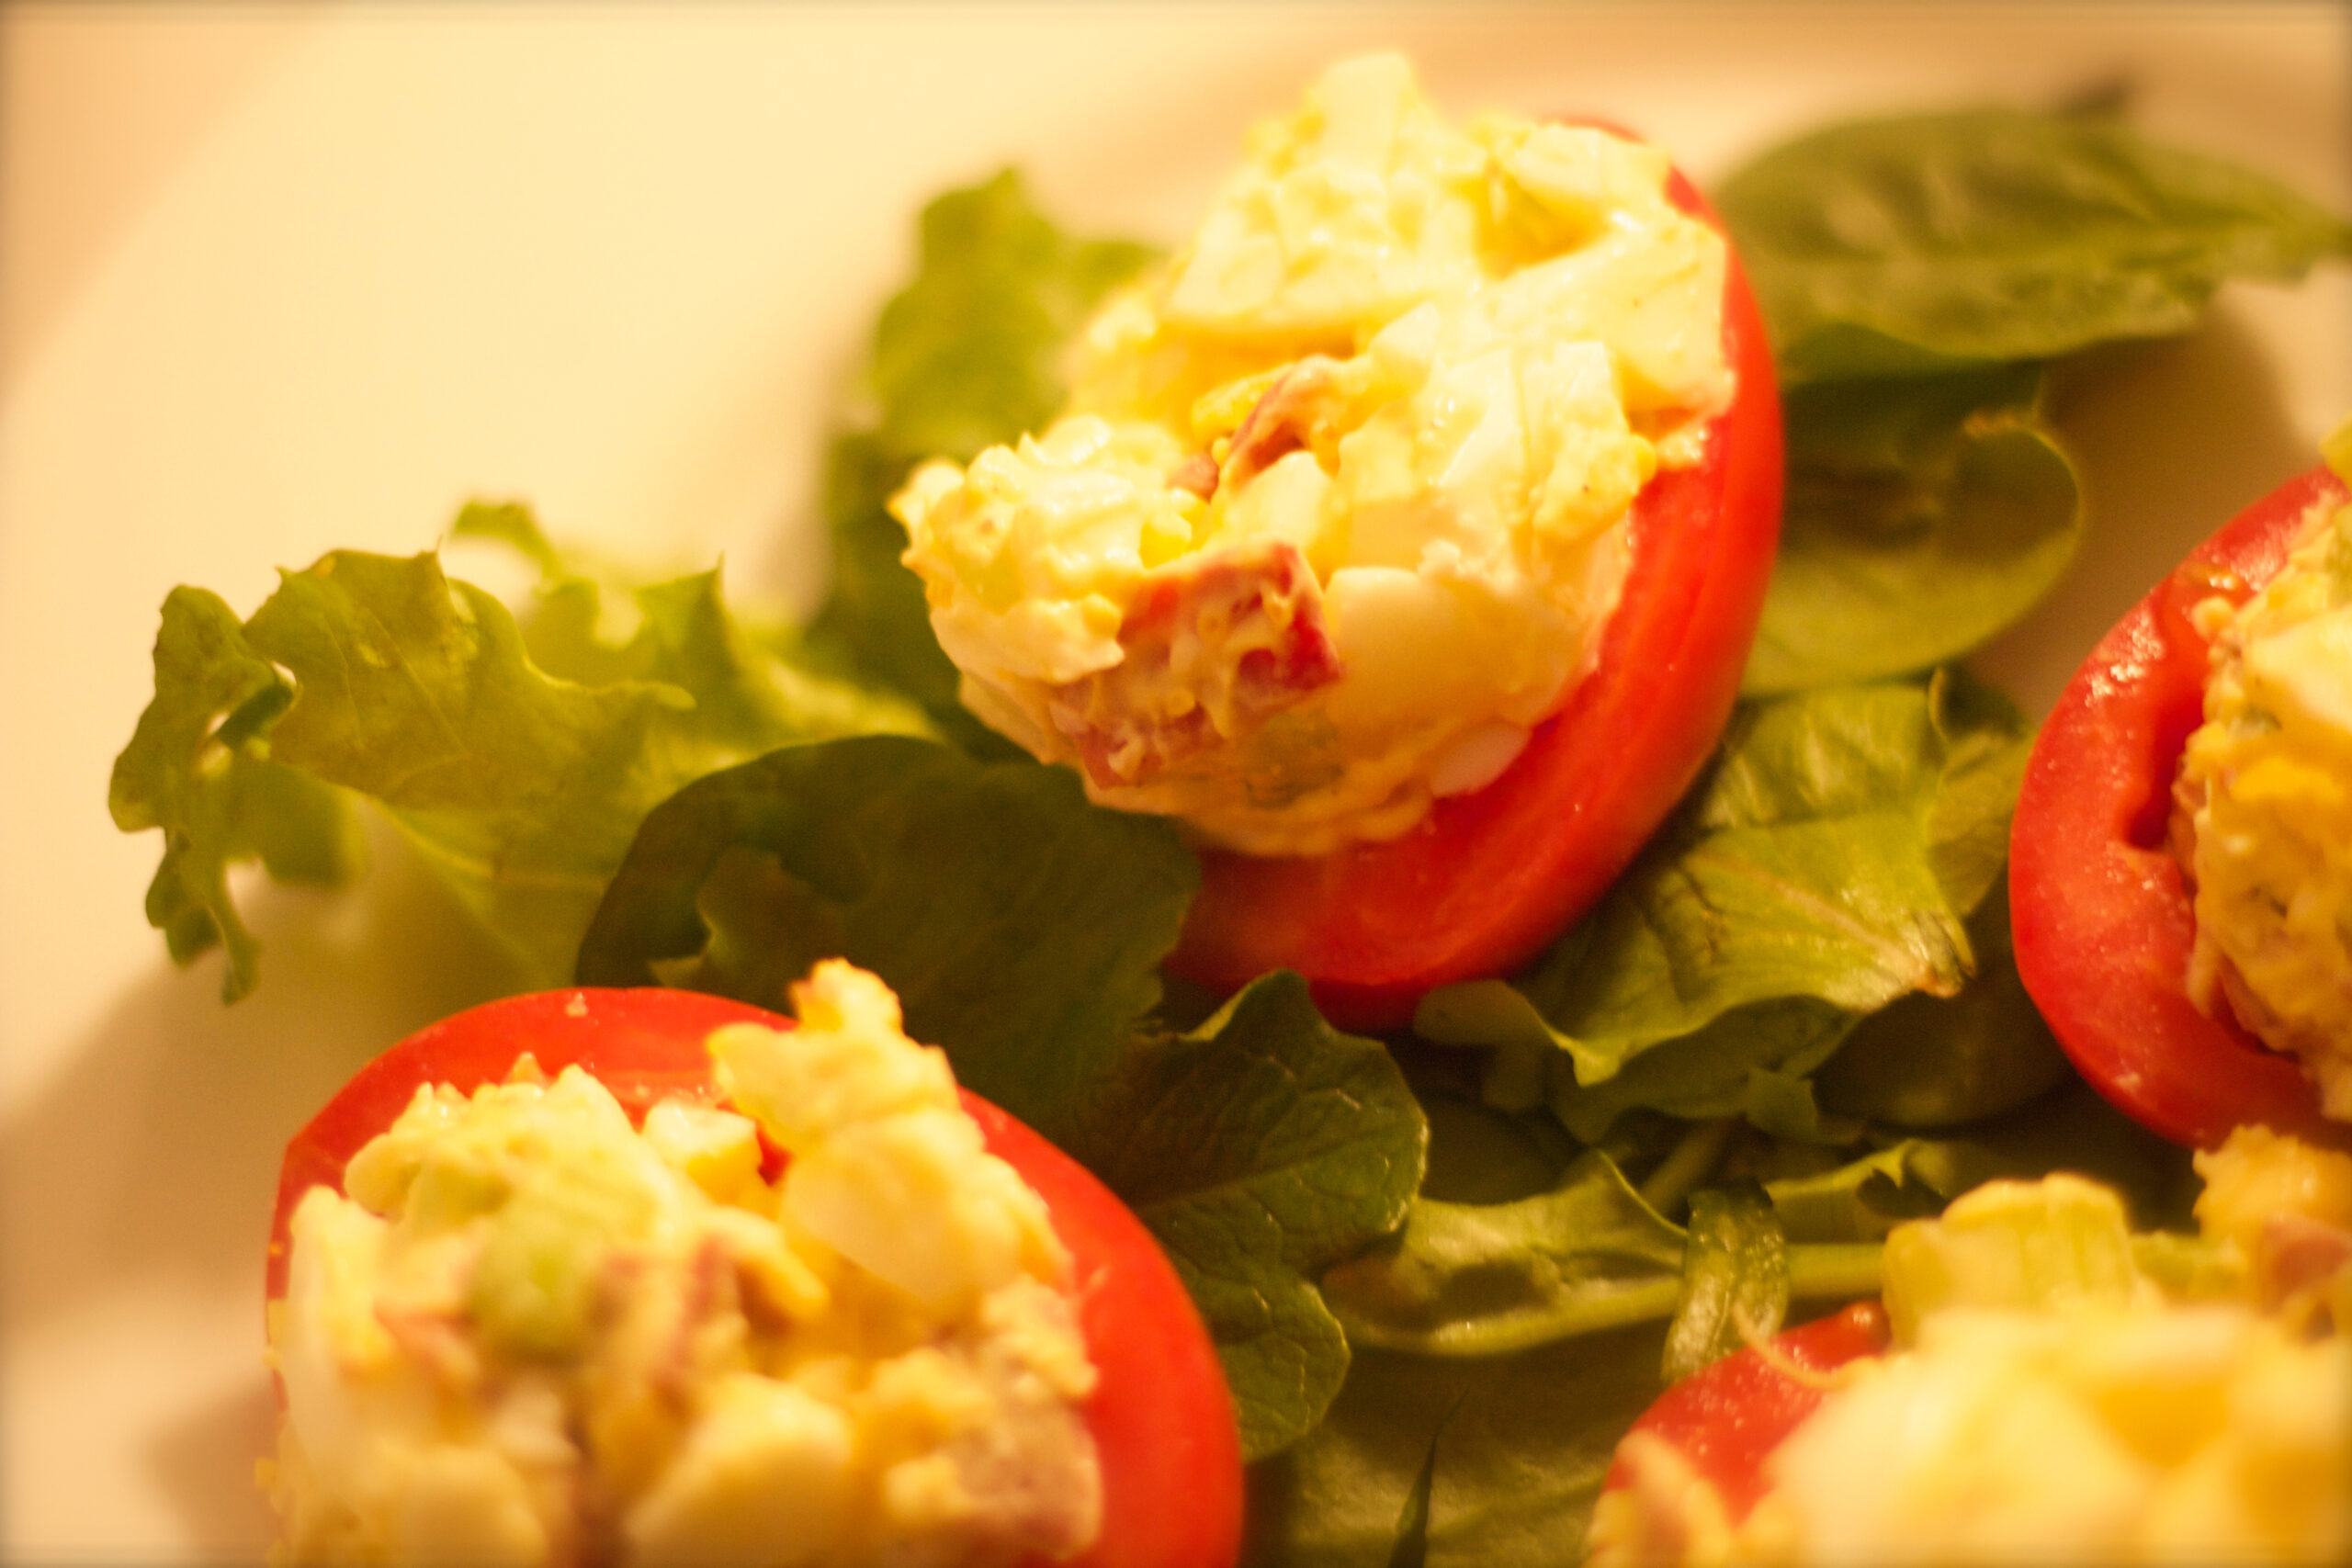 Turkey Bacon Egg Salad - served in a tomato! Packed with protein and flavor. Perfect for postop bariatric surgery patients. #wls #vsg #rny #foodcoachme